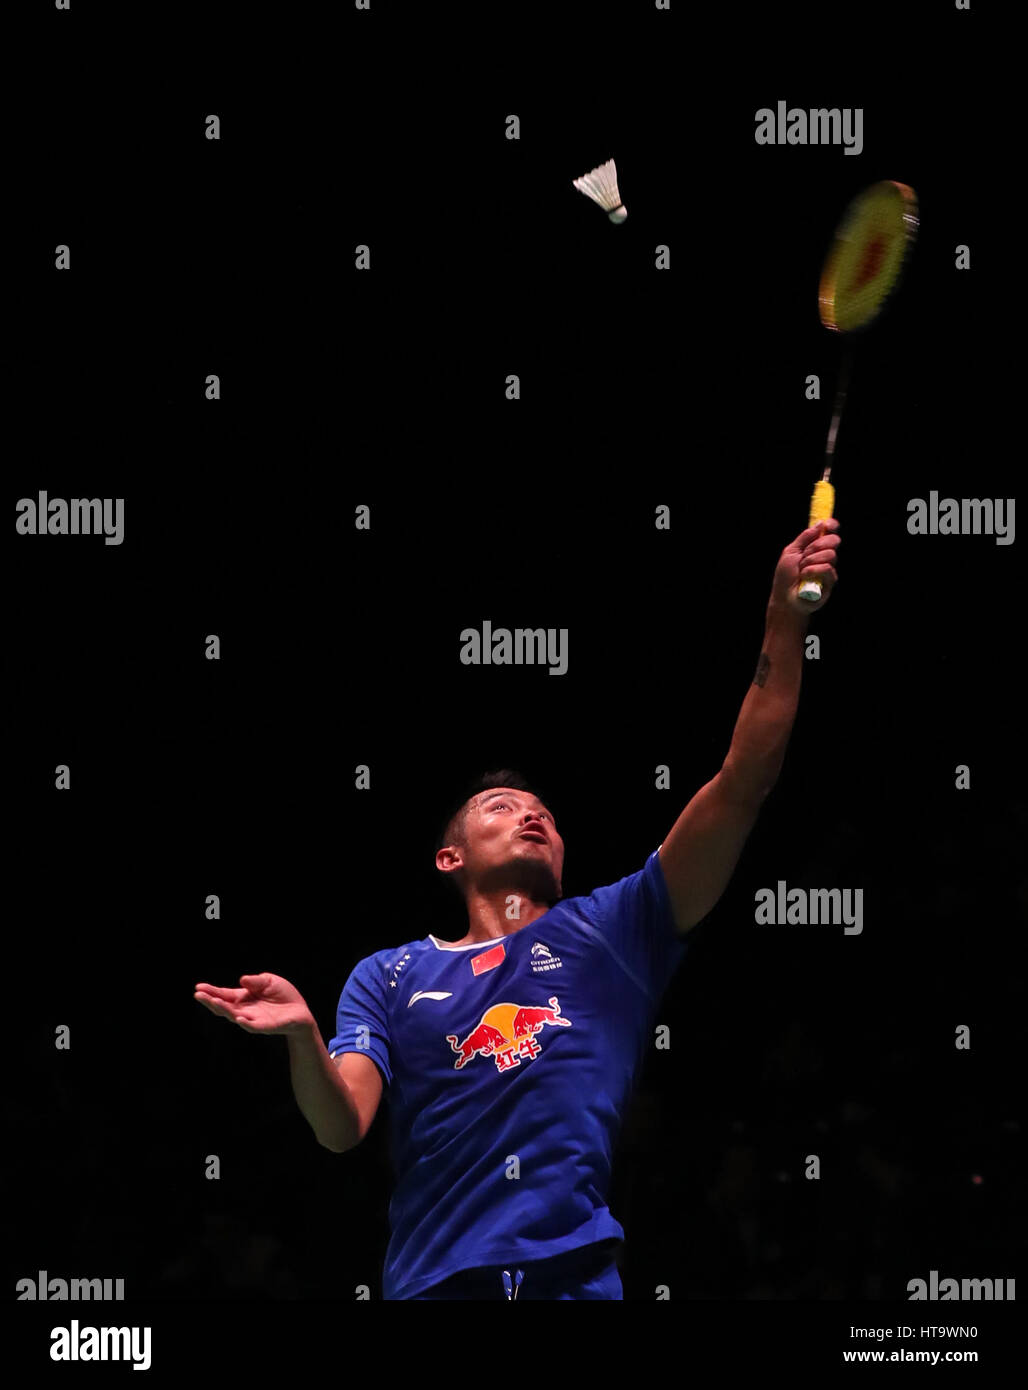 China's Lin Dan in action during his Women's singles match during day three of the YONEX All England Open Badminton Championships at the Barclaycard Arena, Birmingham. Stock Photo